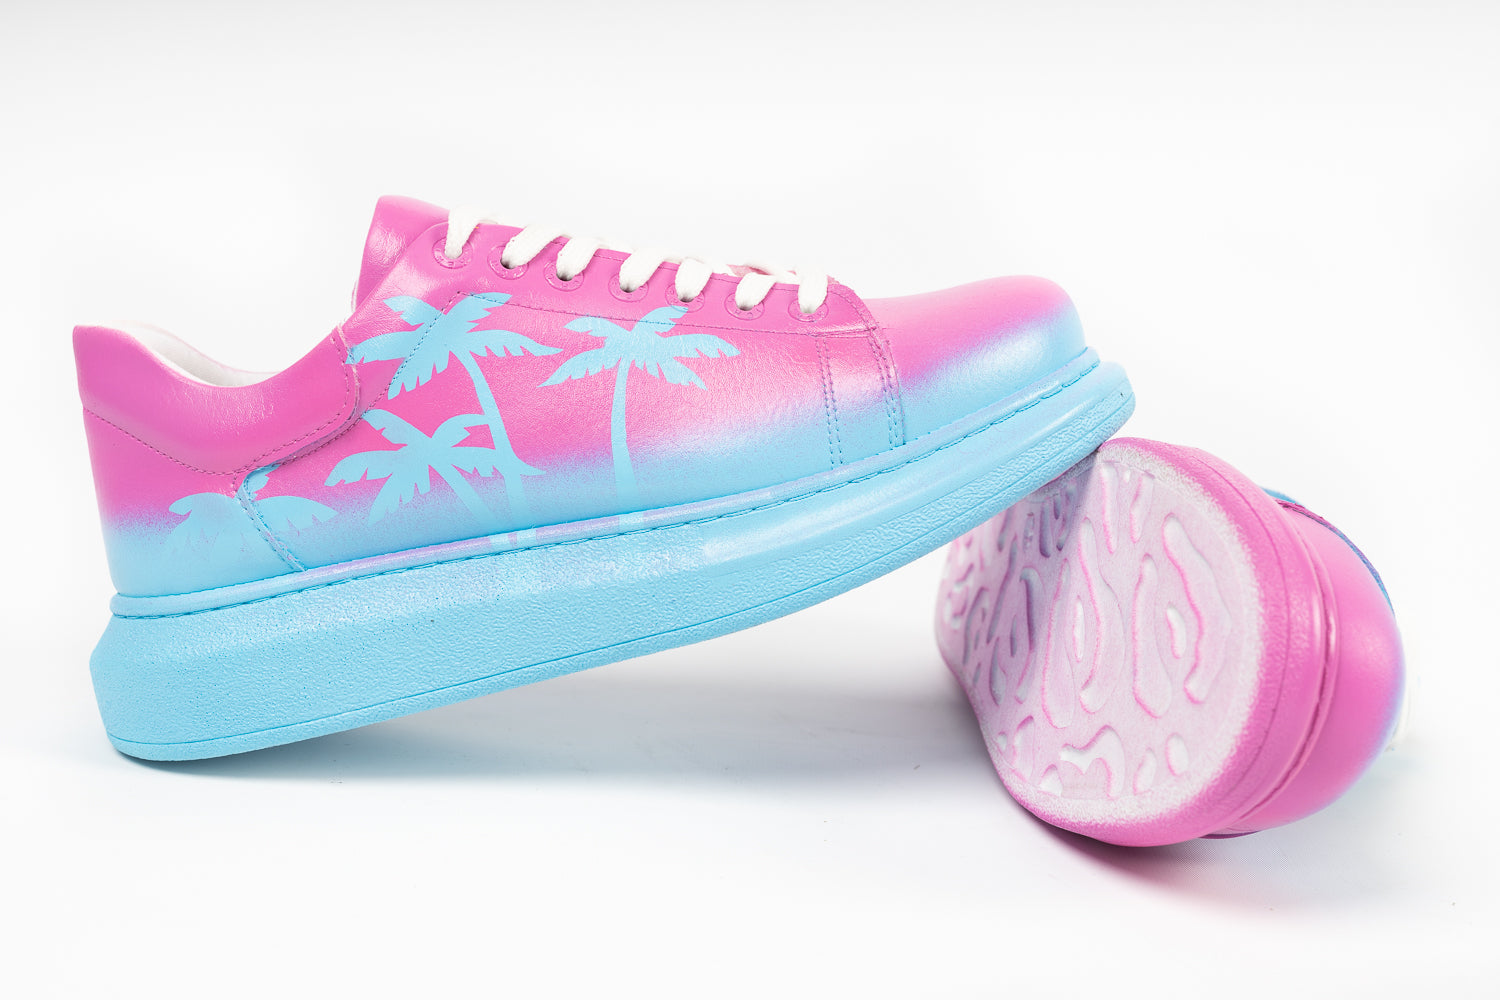 Palm Pink & Blue - Swagg Splash Sneakers